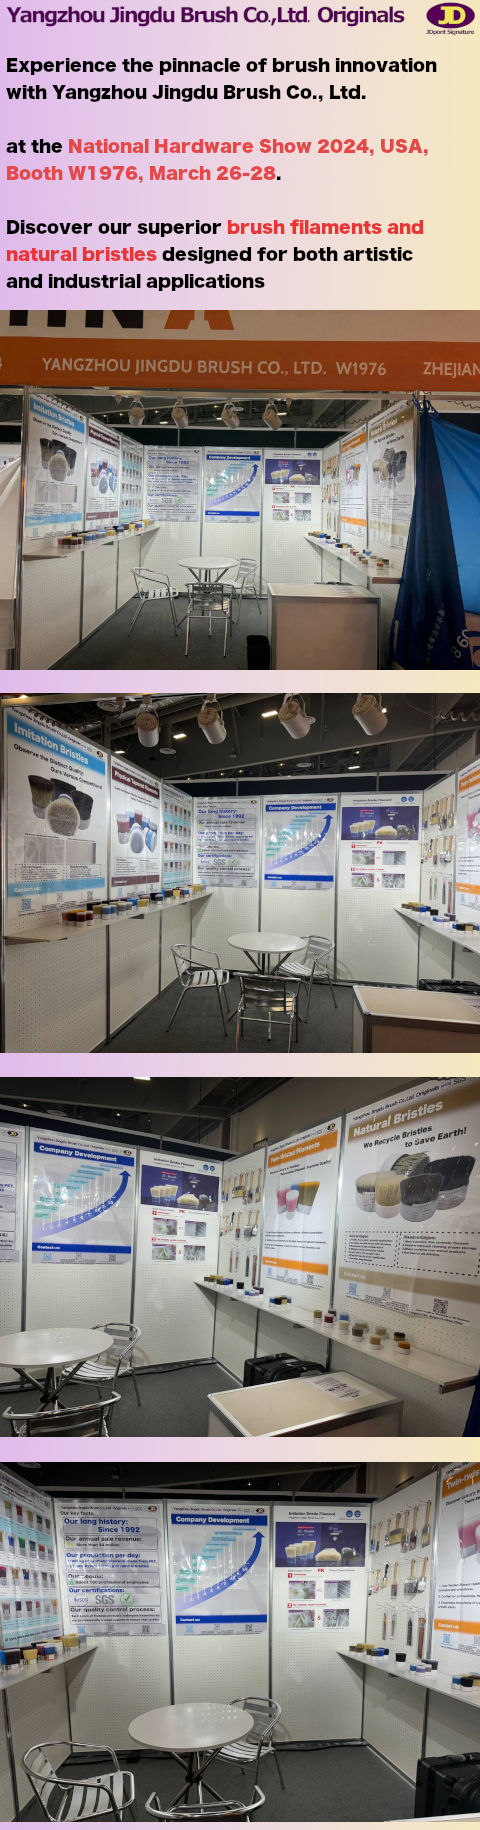 Discover Brush Excellence at Booth W1976, National Hardware Show 2024, USA with Yangzhou Jingdu